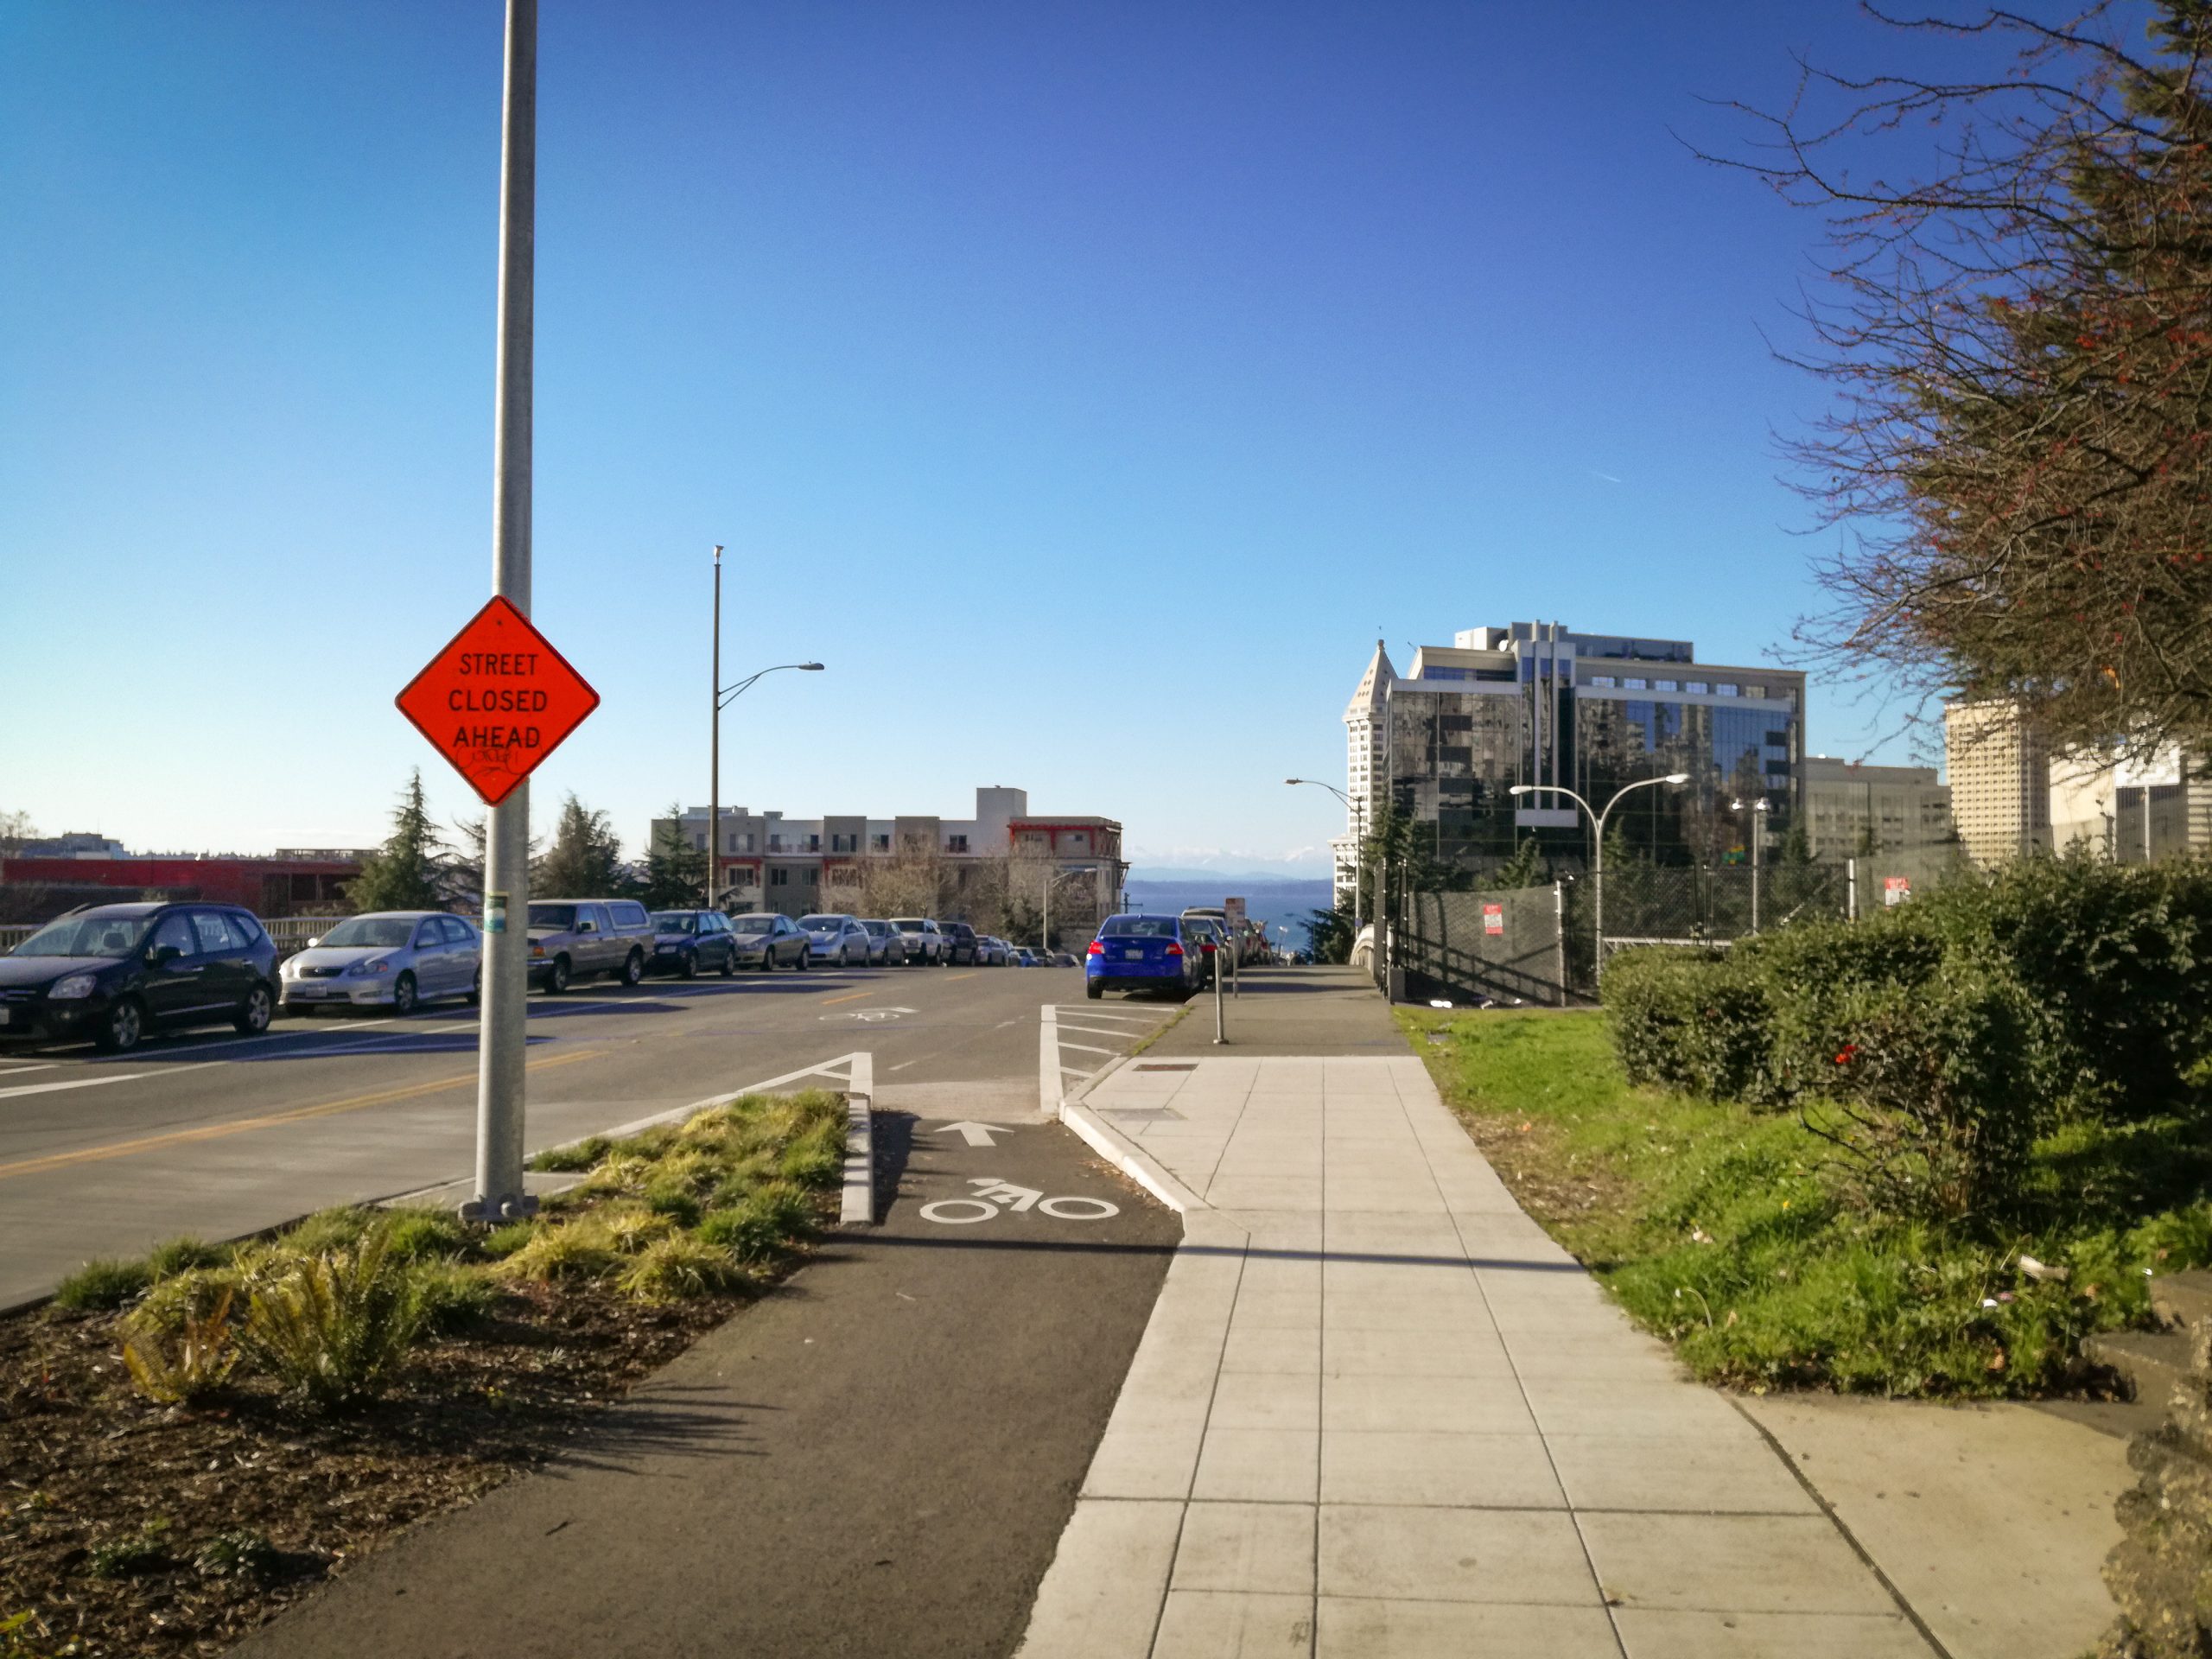 The historic Yesler Way in Seattle